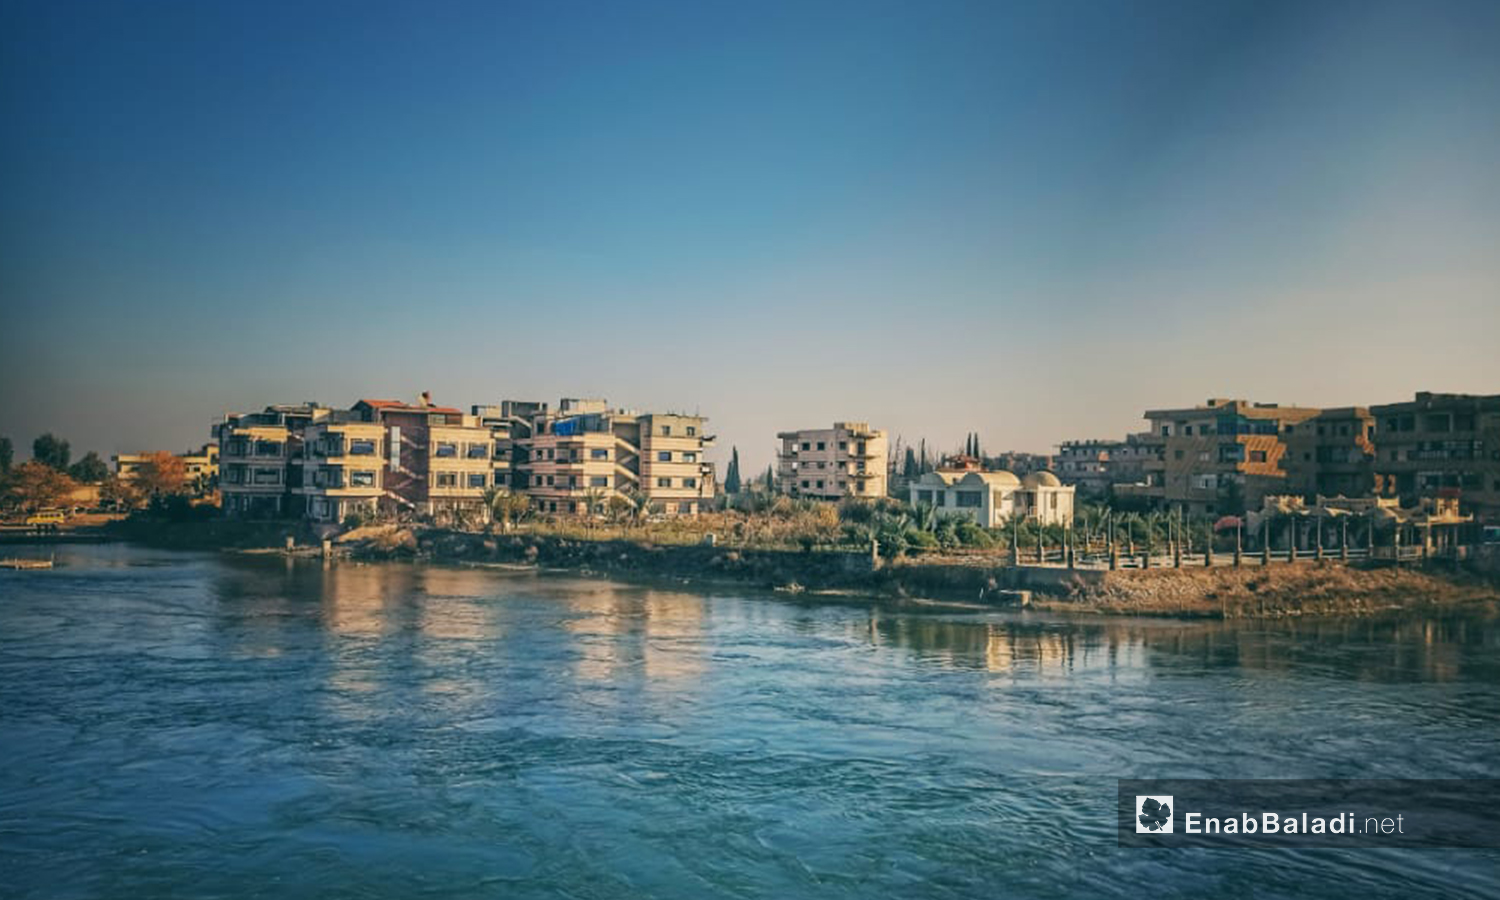 Residential buildings overlooking the Euphrates River in al-Raqqa city, northern Syria - 09 July 2020 (Enab Baladi)